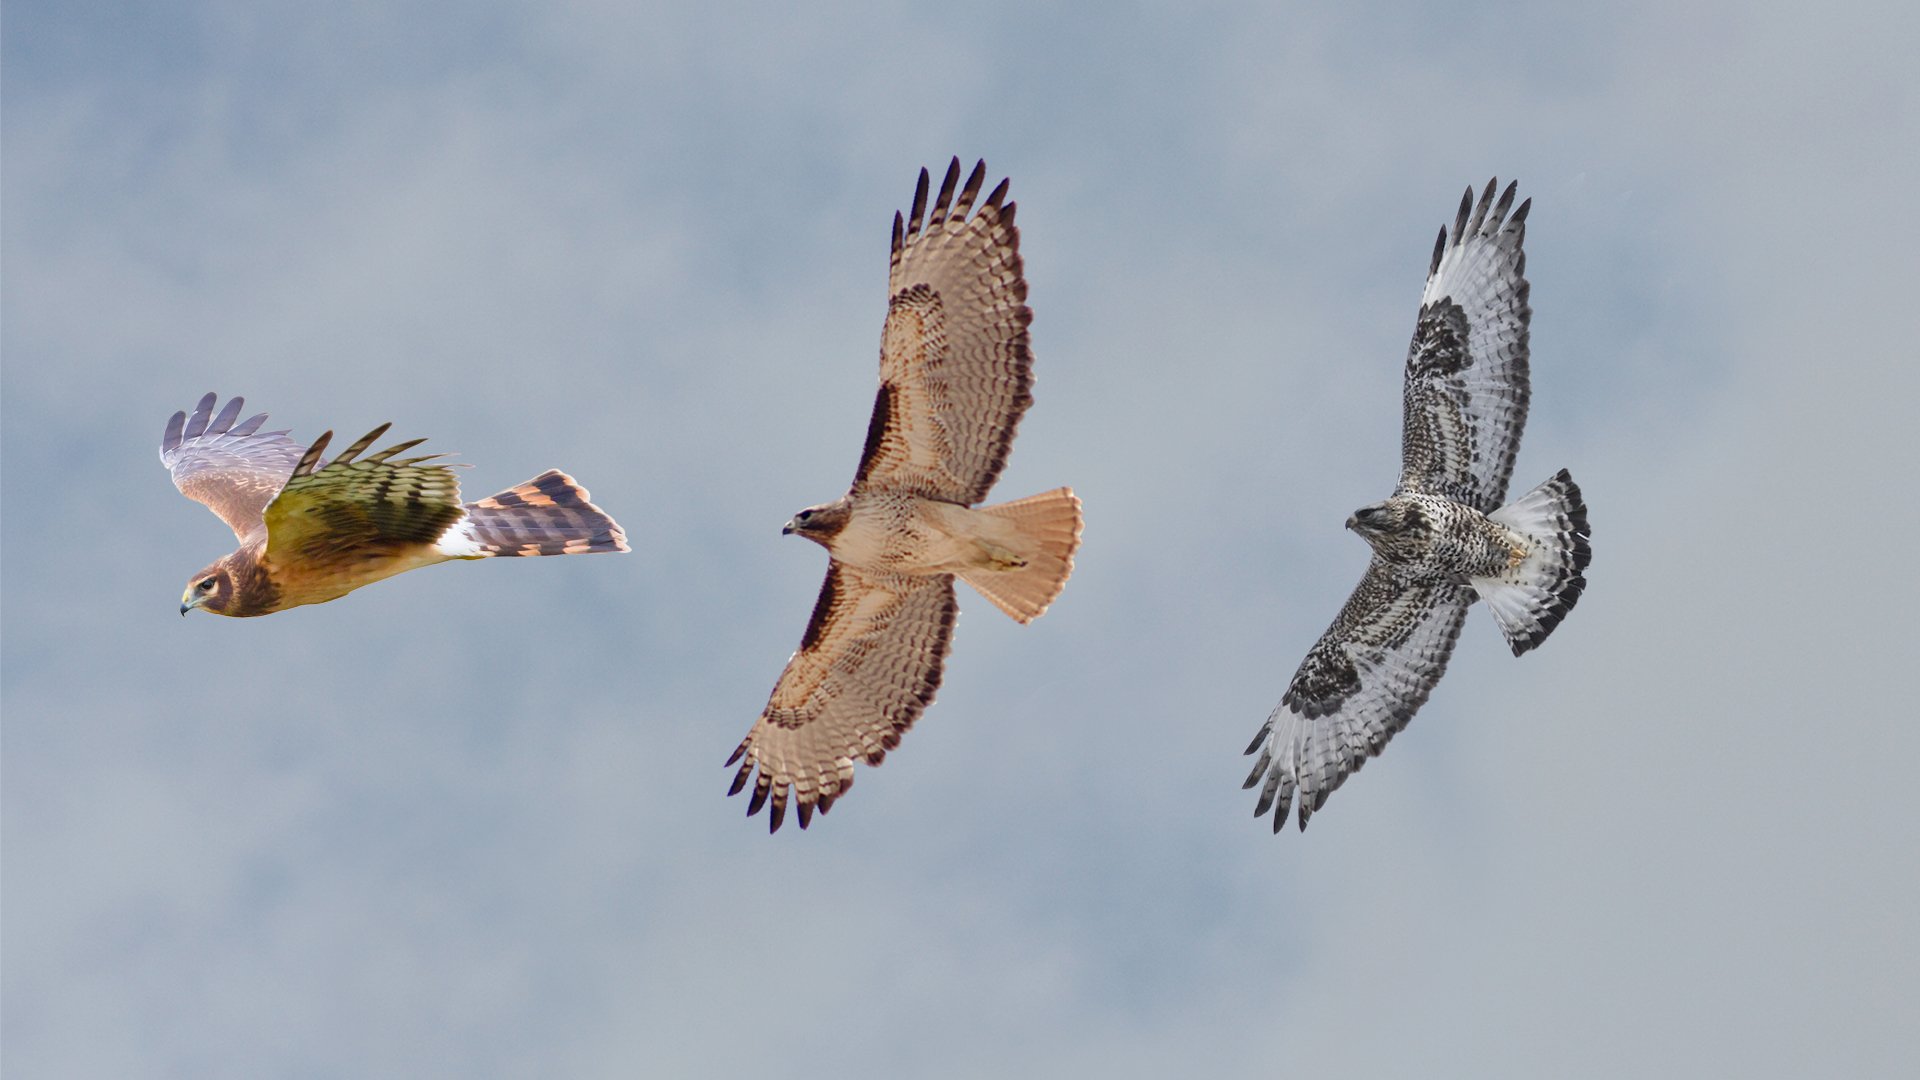 Left to right: Northern Harrier, Red-Tailed Hawk, Rough-Legged Hawk